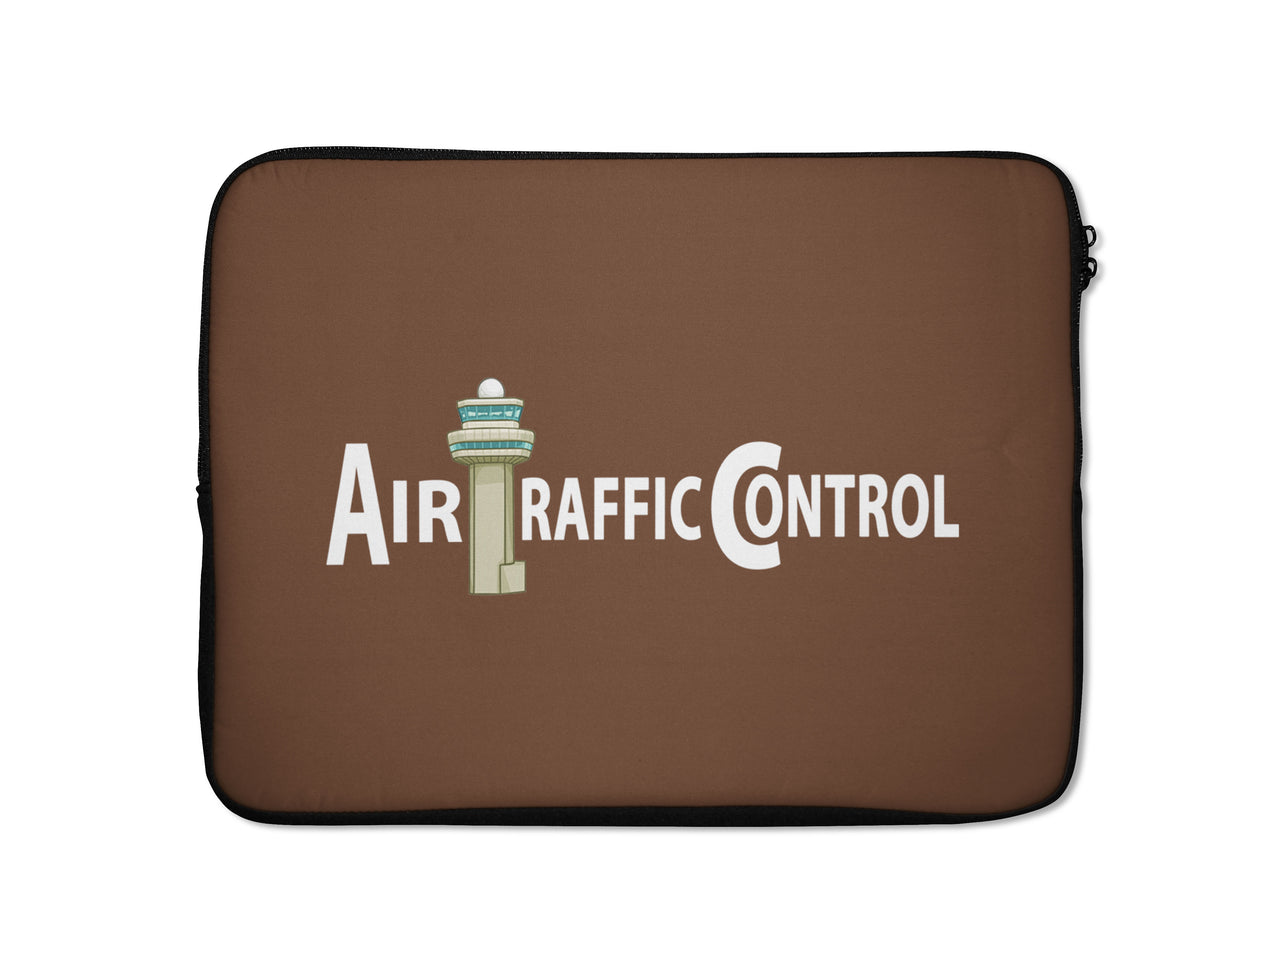 Air Traffic Control Designed Laptop & Tablet Cases